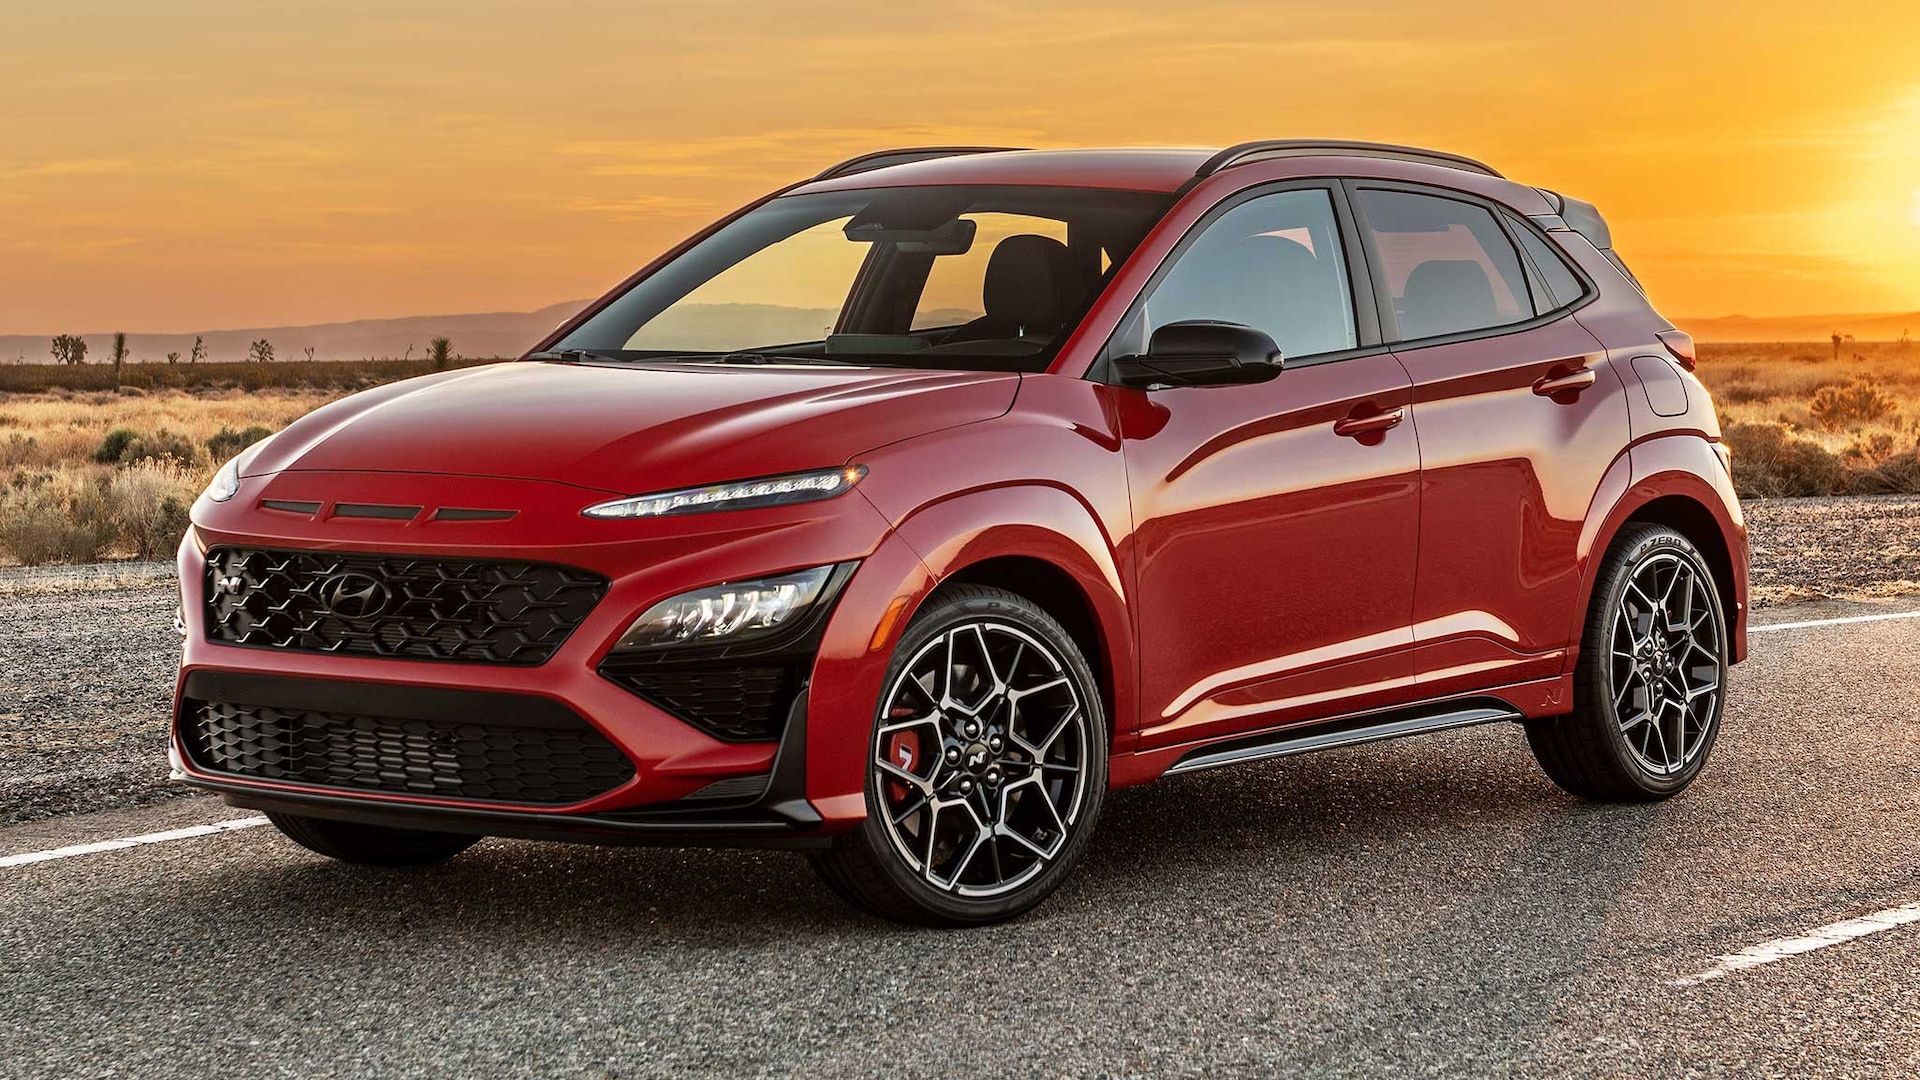 The 2022 Hyundai Kona N Costs How Much More?